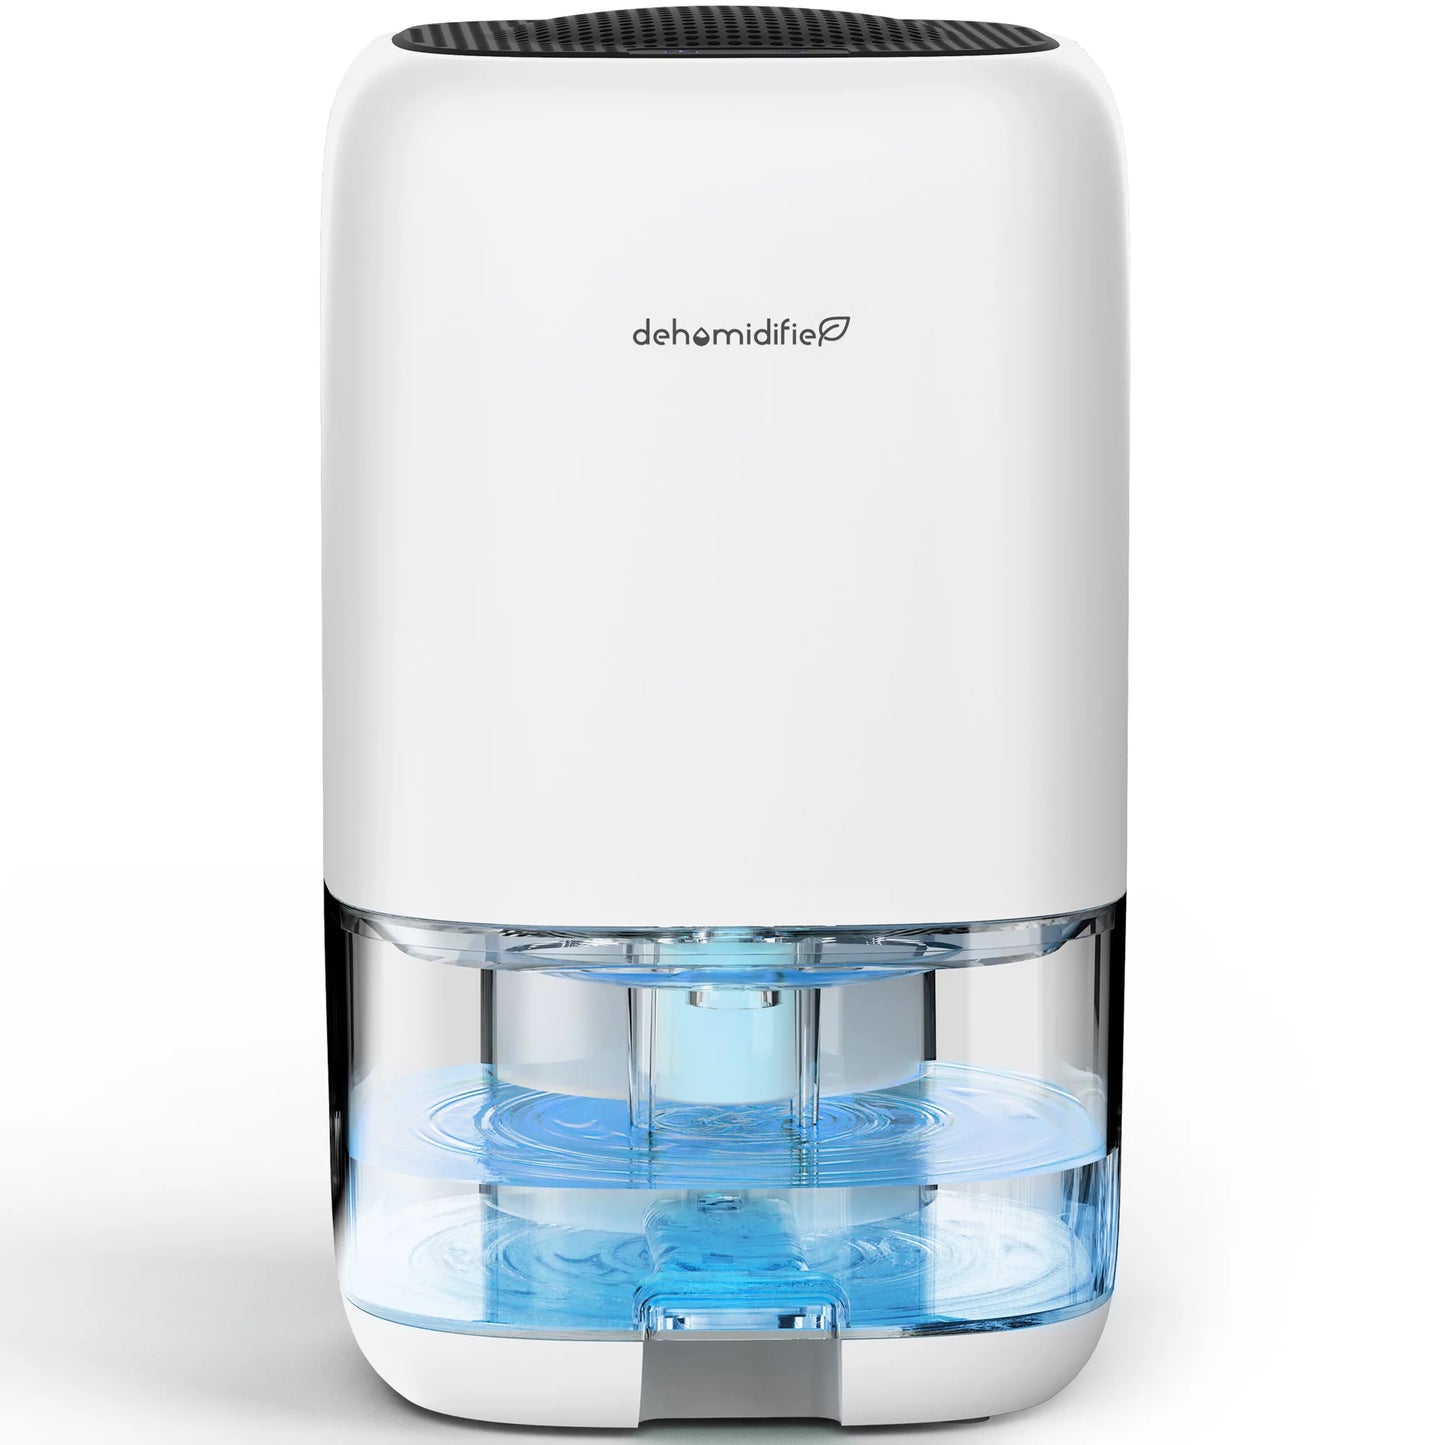 ALROCKET Dehumidifier Portable and Ultra Quiet with Automatic Defrosting for Home 1000ML(2200 Cubic Feet)